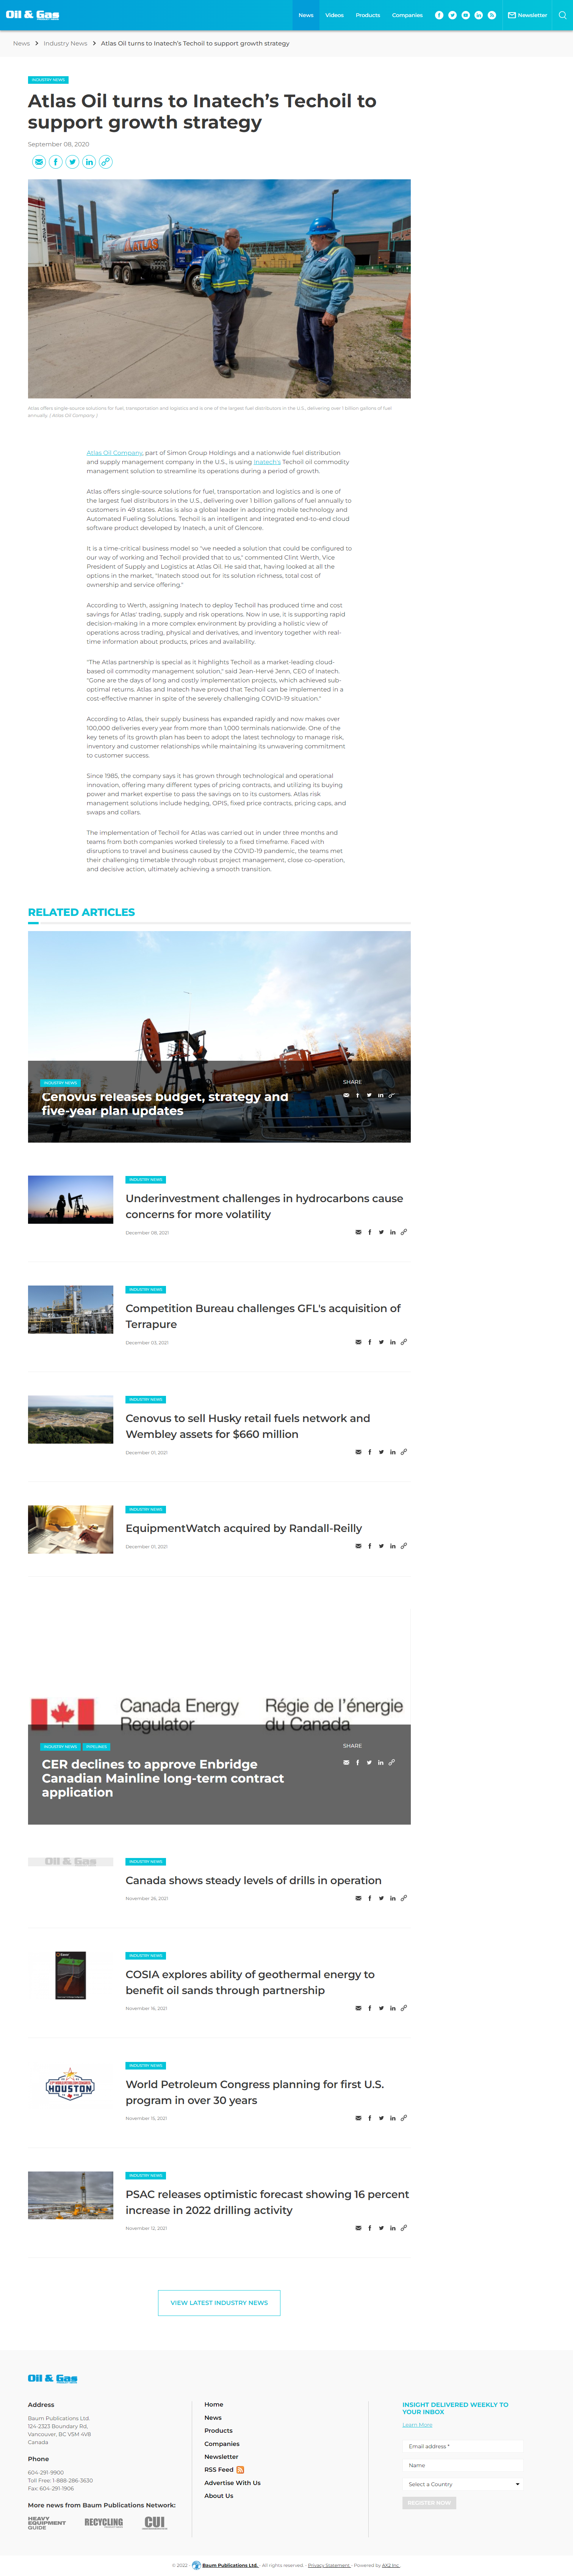 screencapture-oilandgasproductnews-article-34756-atlas-oil-turns-to-inatechs-techoil-to-support-growth-strategy-2022-02-24-12_34_52